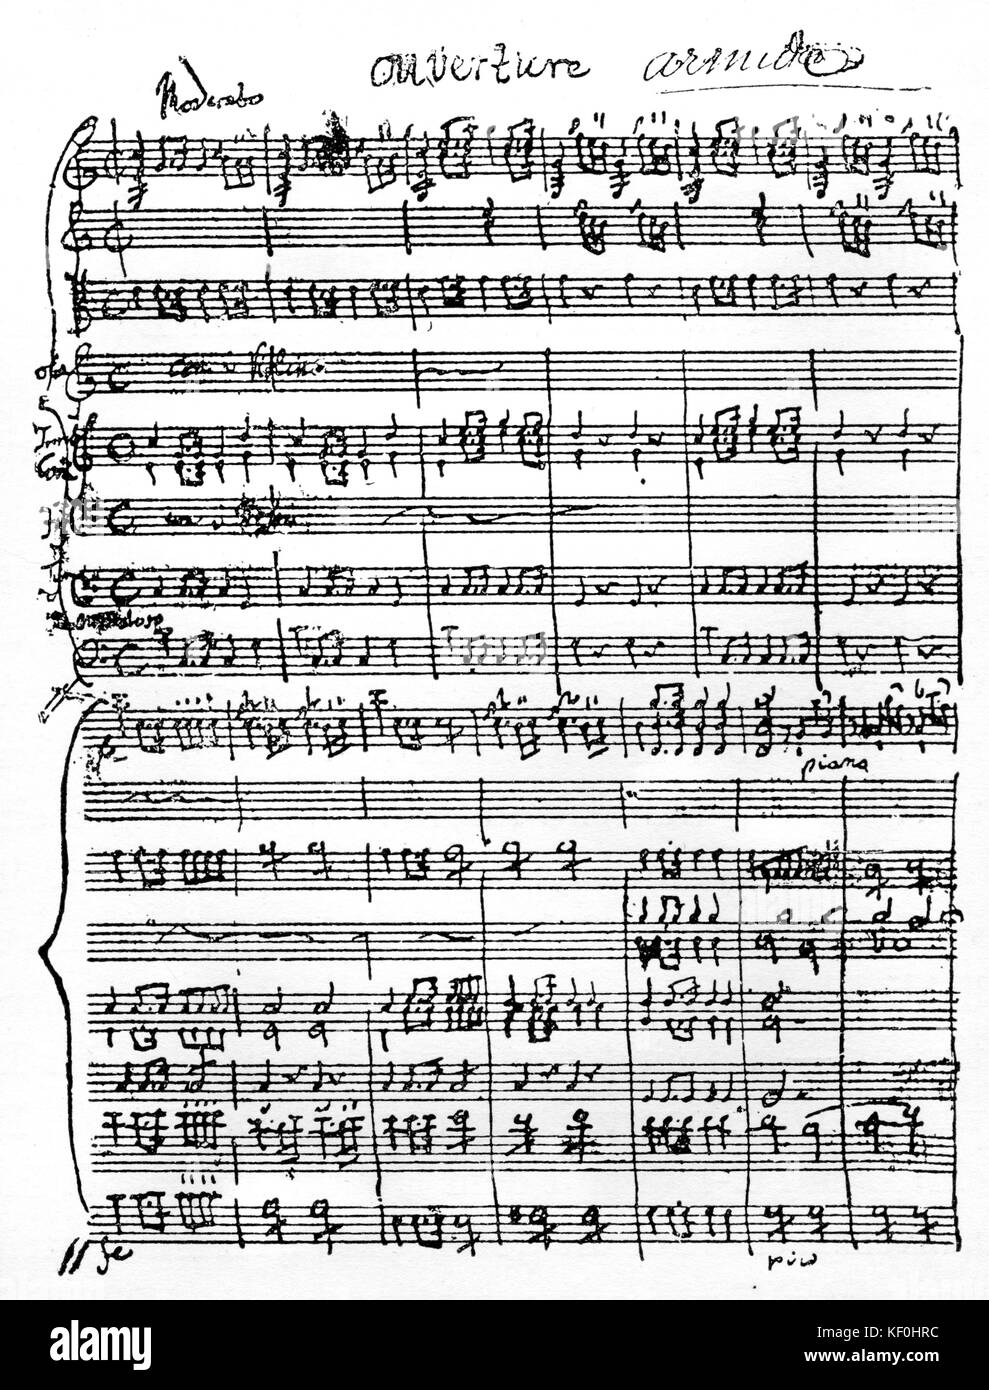 'Armide' by Christoph Gluck.  First score page of the opera of 1777, handwritten by the composer.  CG german composer 2 July 1714 - 15 November 1787. Stock Photo